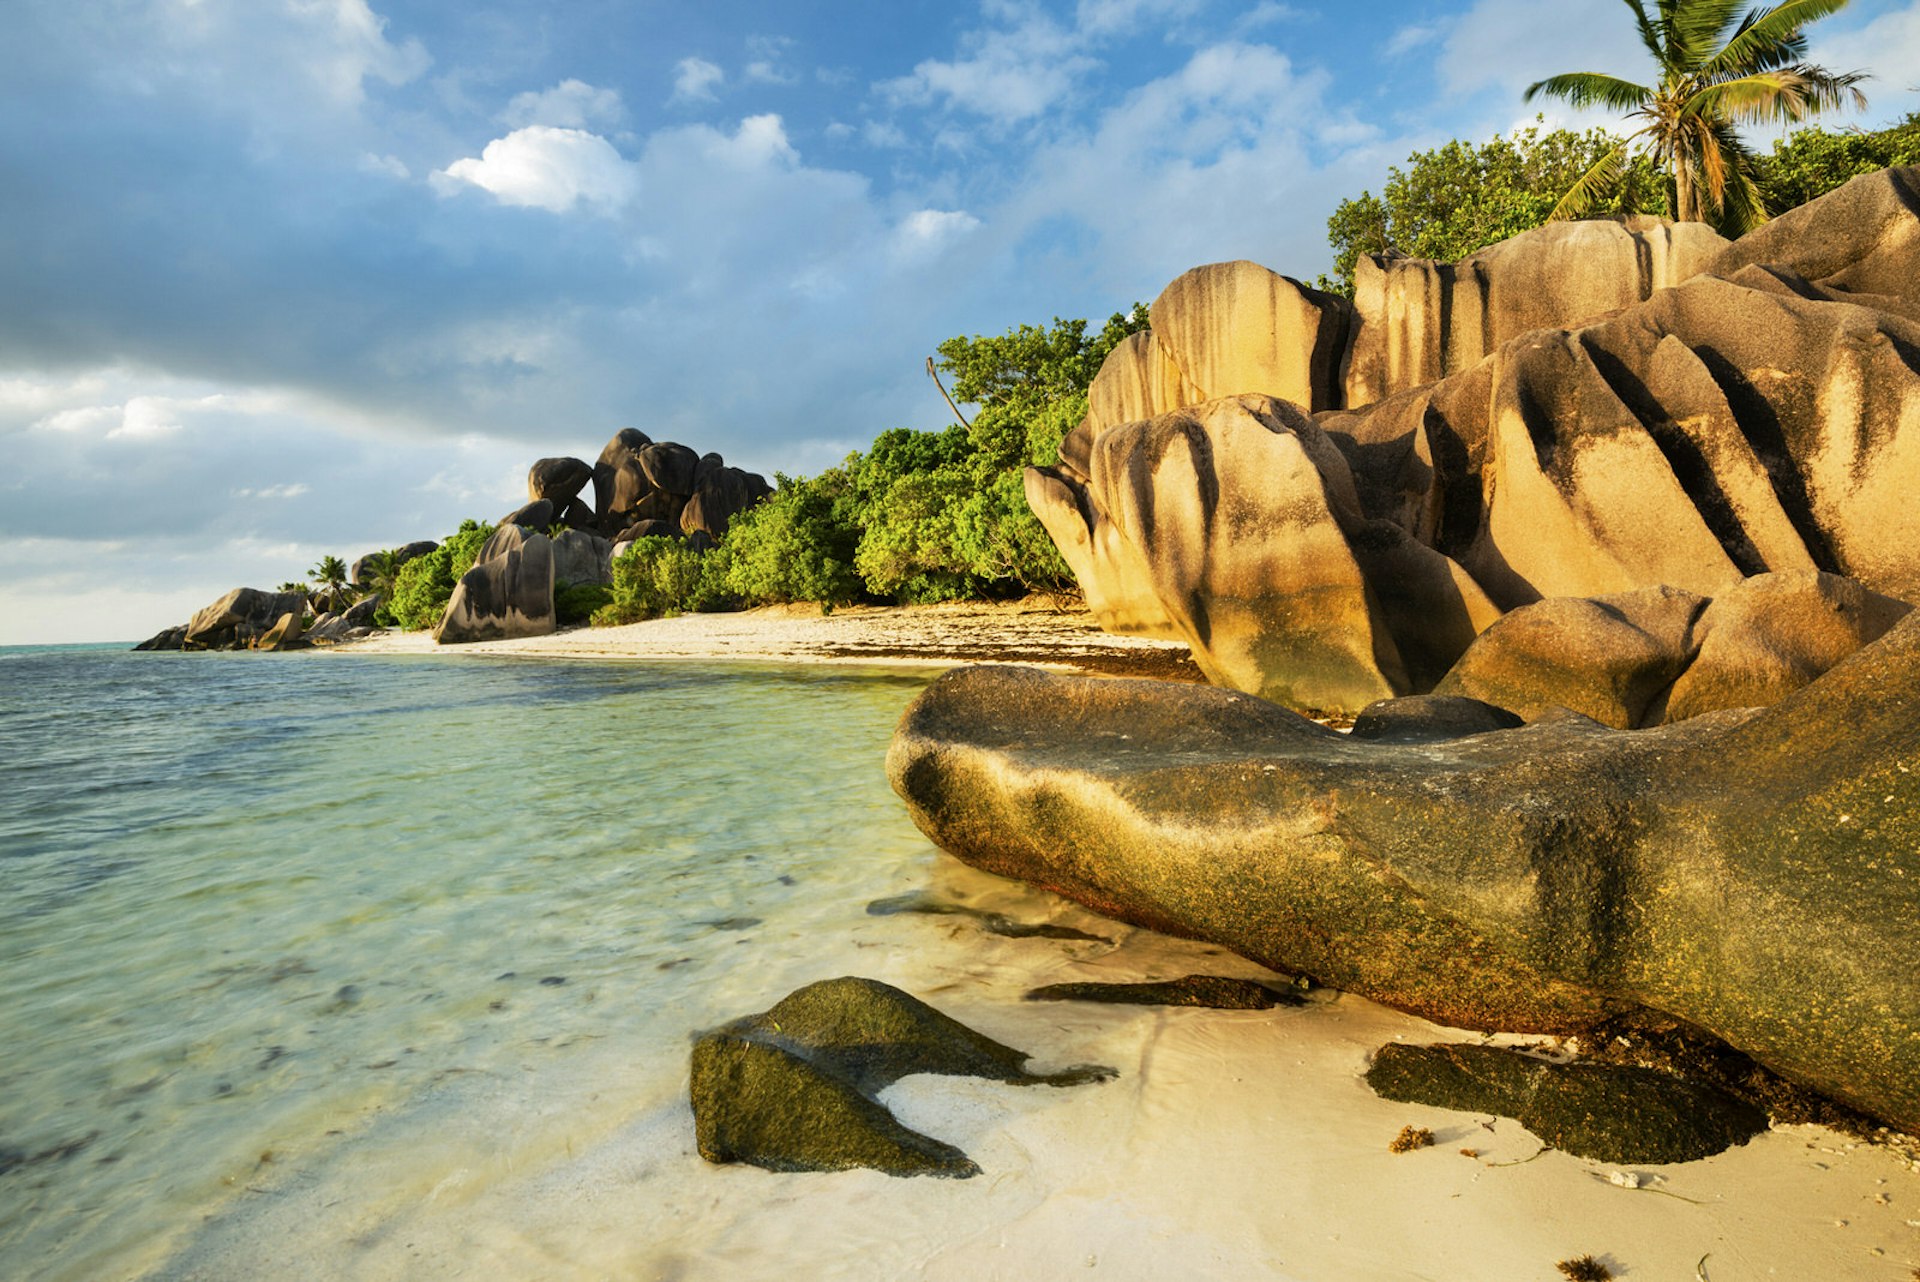 Anse Source d’Argent: smooth yellow and brown boulders stand on golden sands next to the turquoise sea. In the distance more boulders and trees are visible.